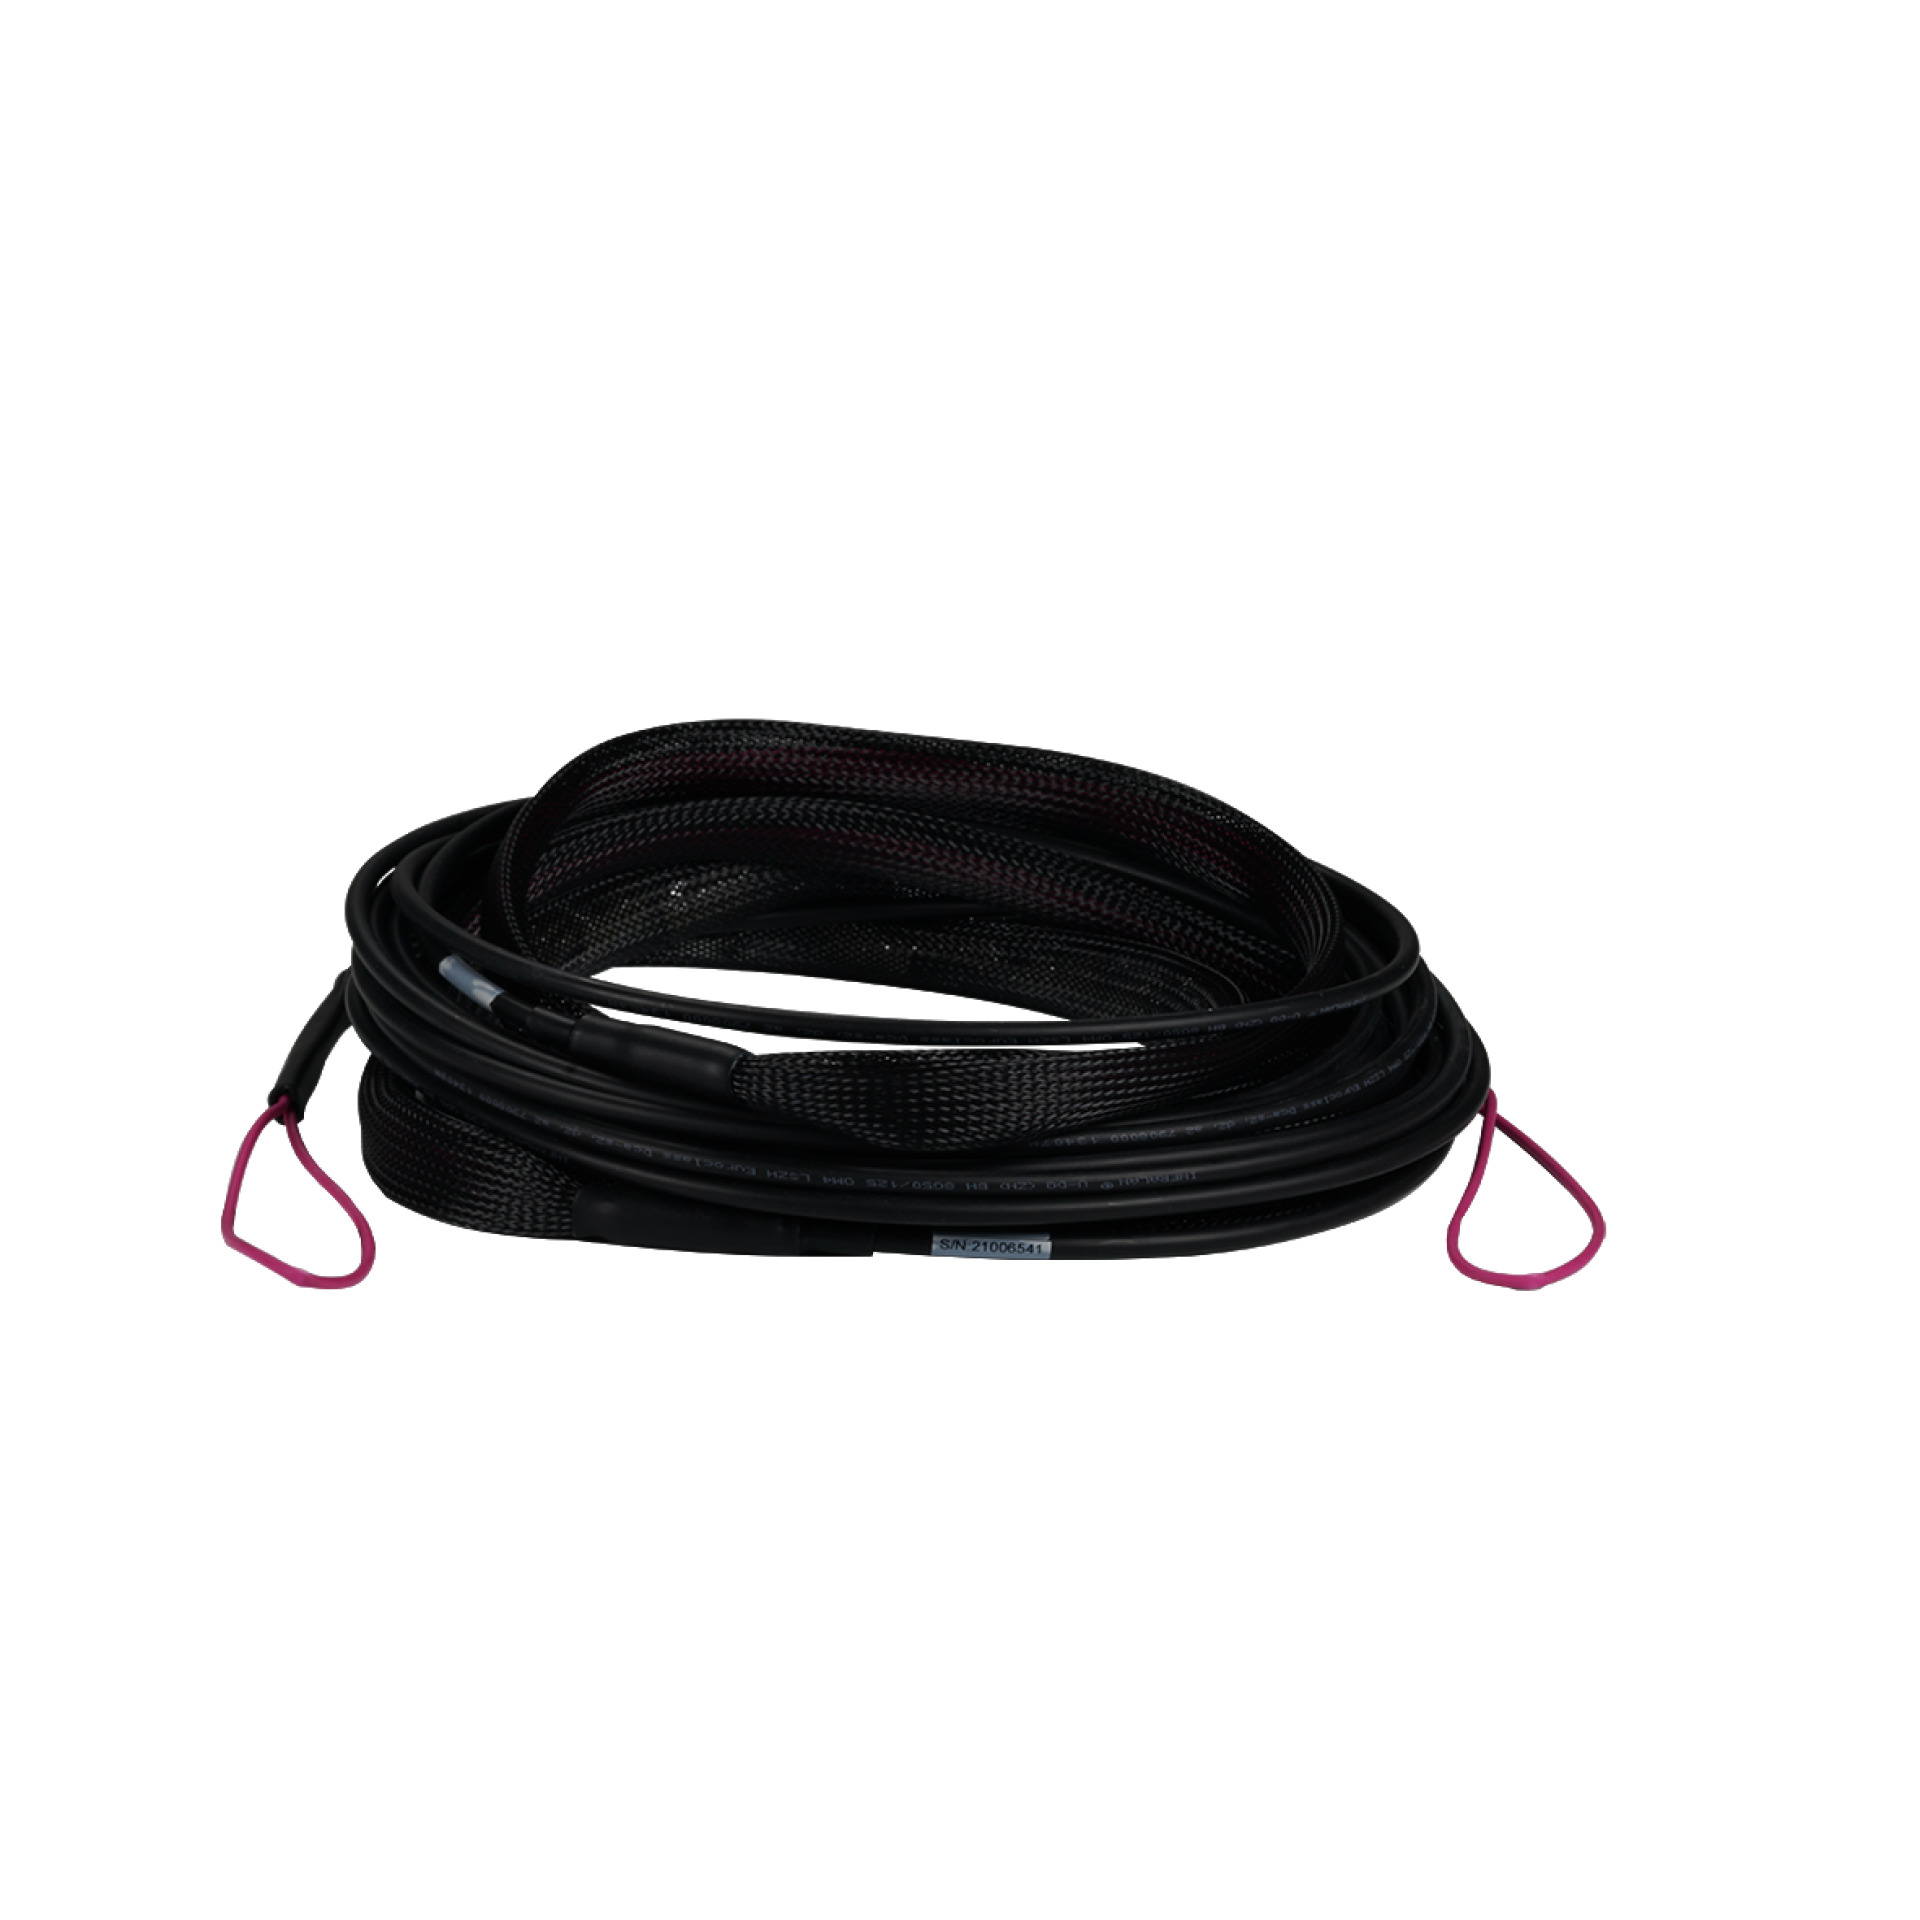 Trunk cable U-DQ(ZN)BH 12G 50/125, SC/SC OM4 130m